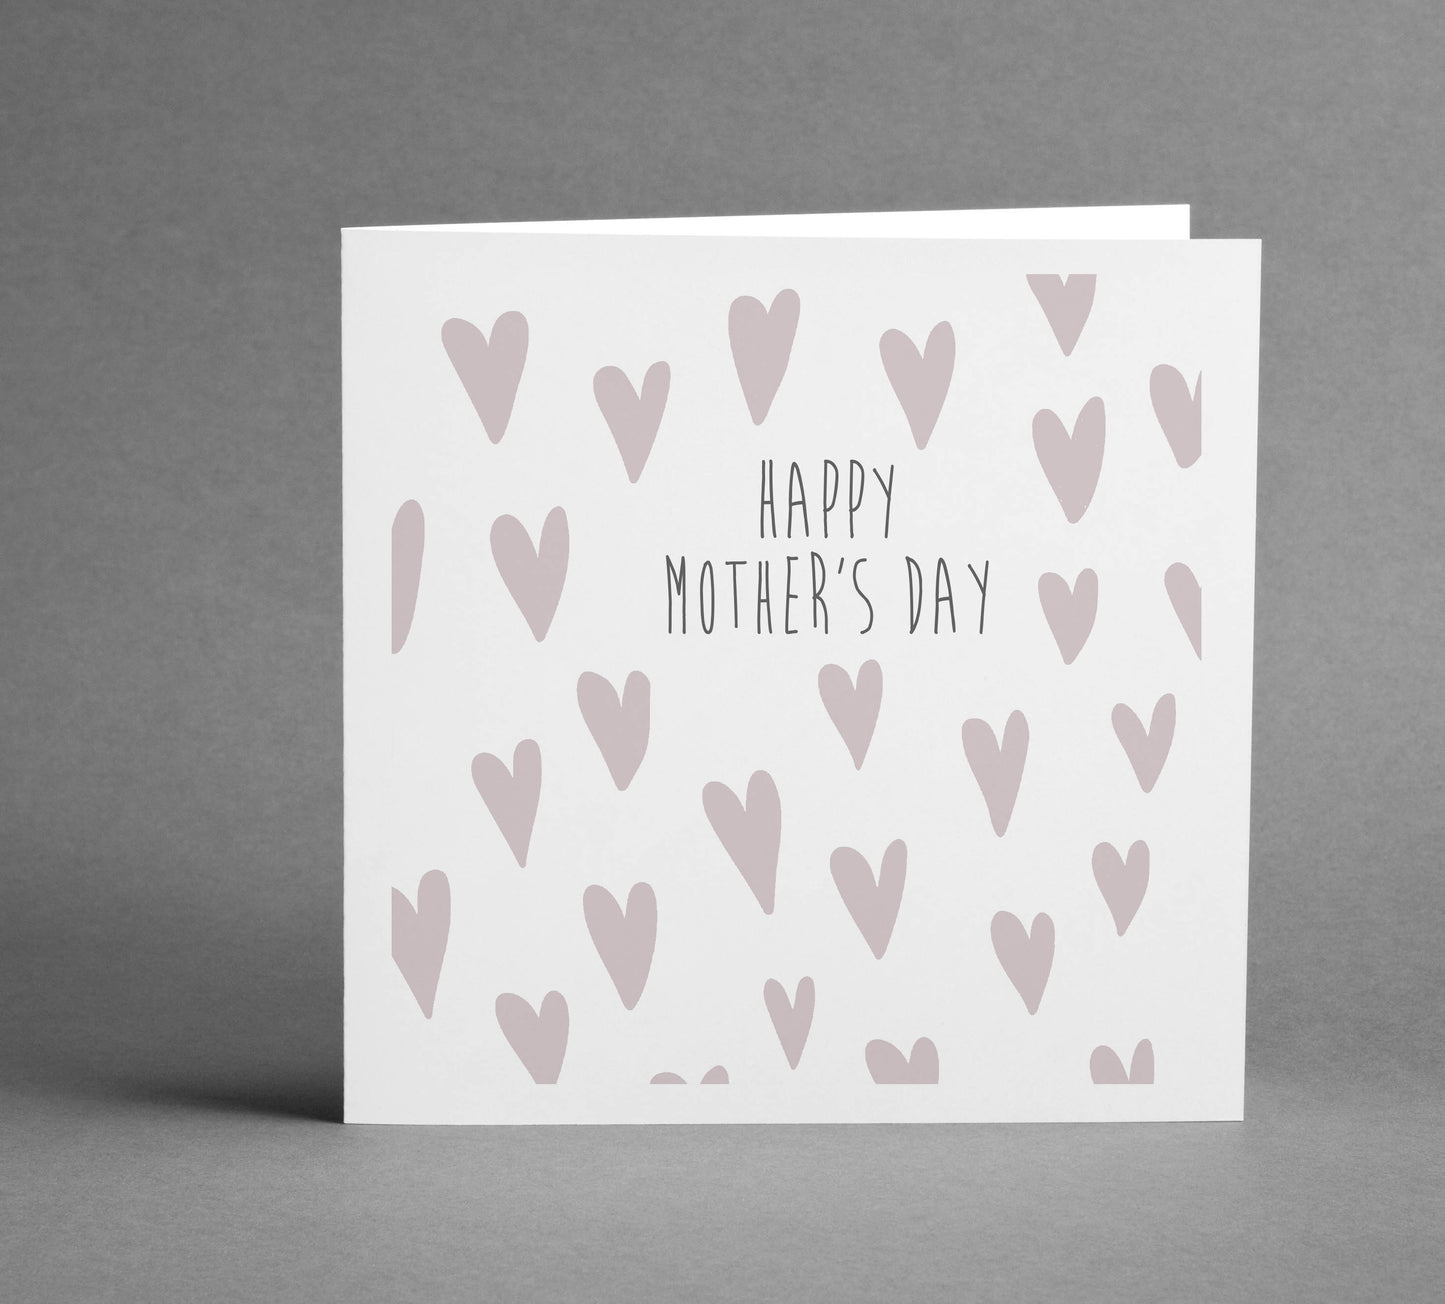 Happy Mother's Day hearts square card